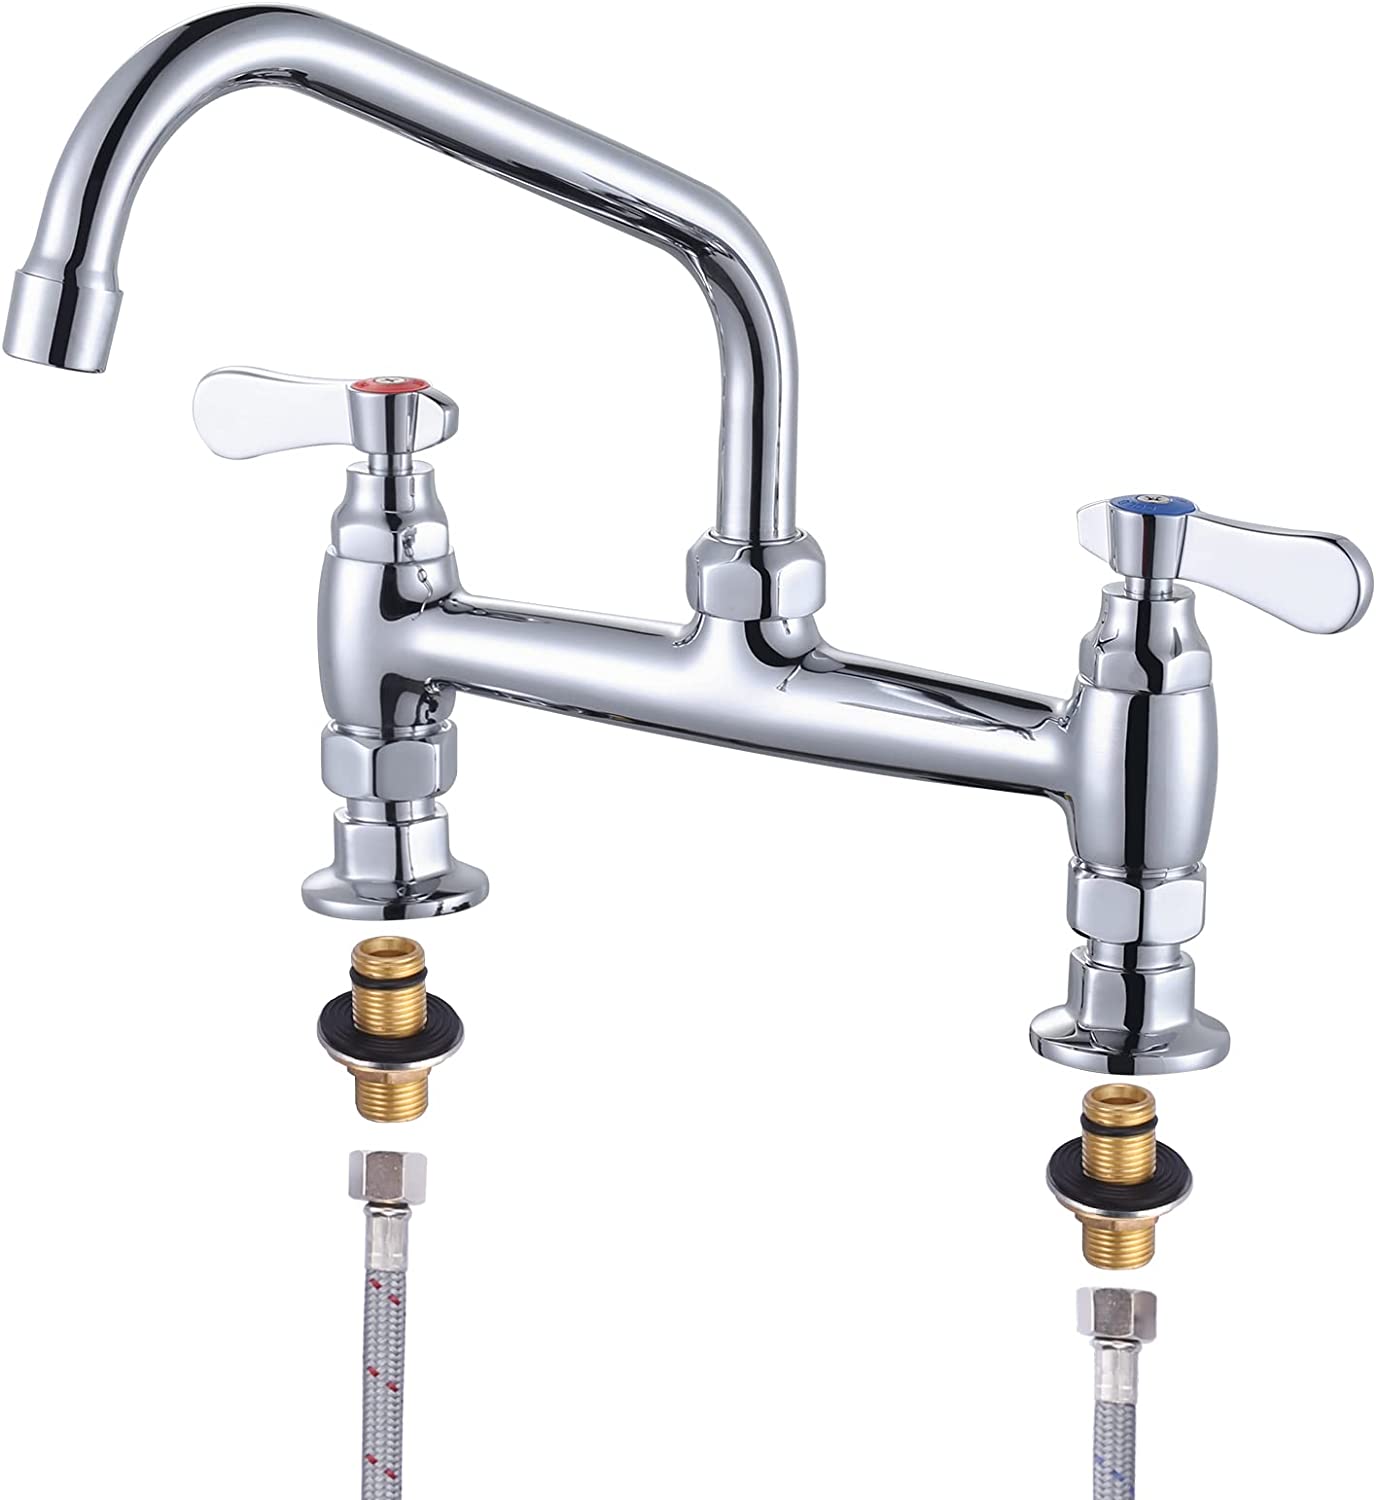 iVIGA Deck Mounted Polish Chrome Commercial Sink Faucet with 8~14 Inch Swivel Spout & Supply Lines